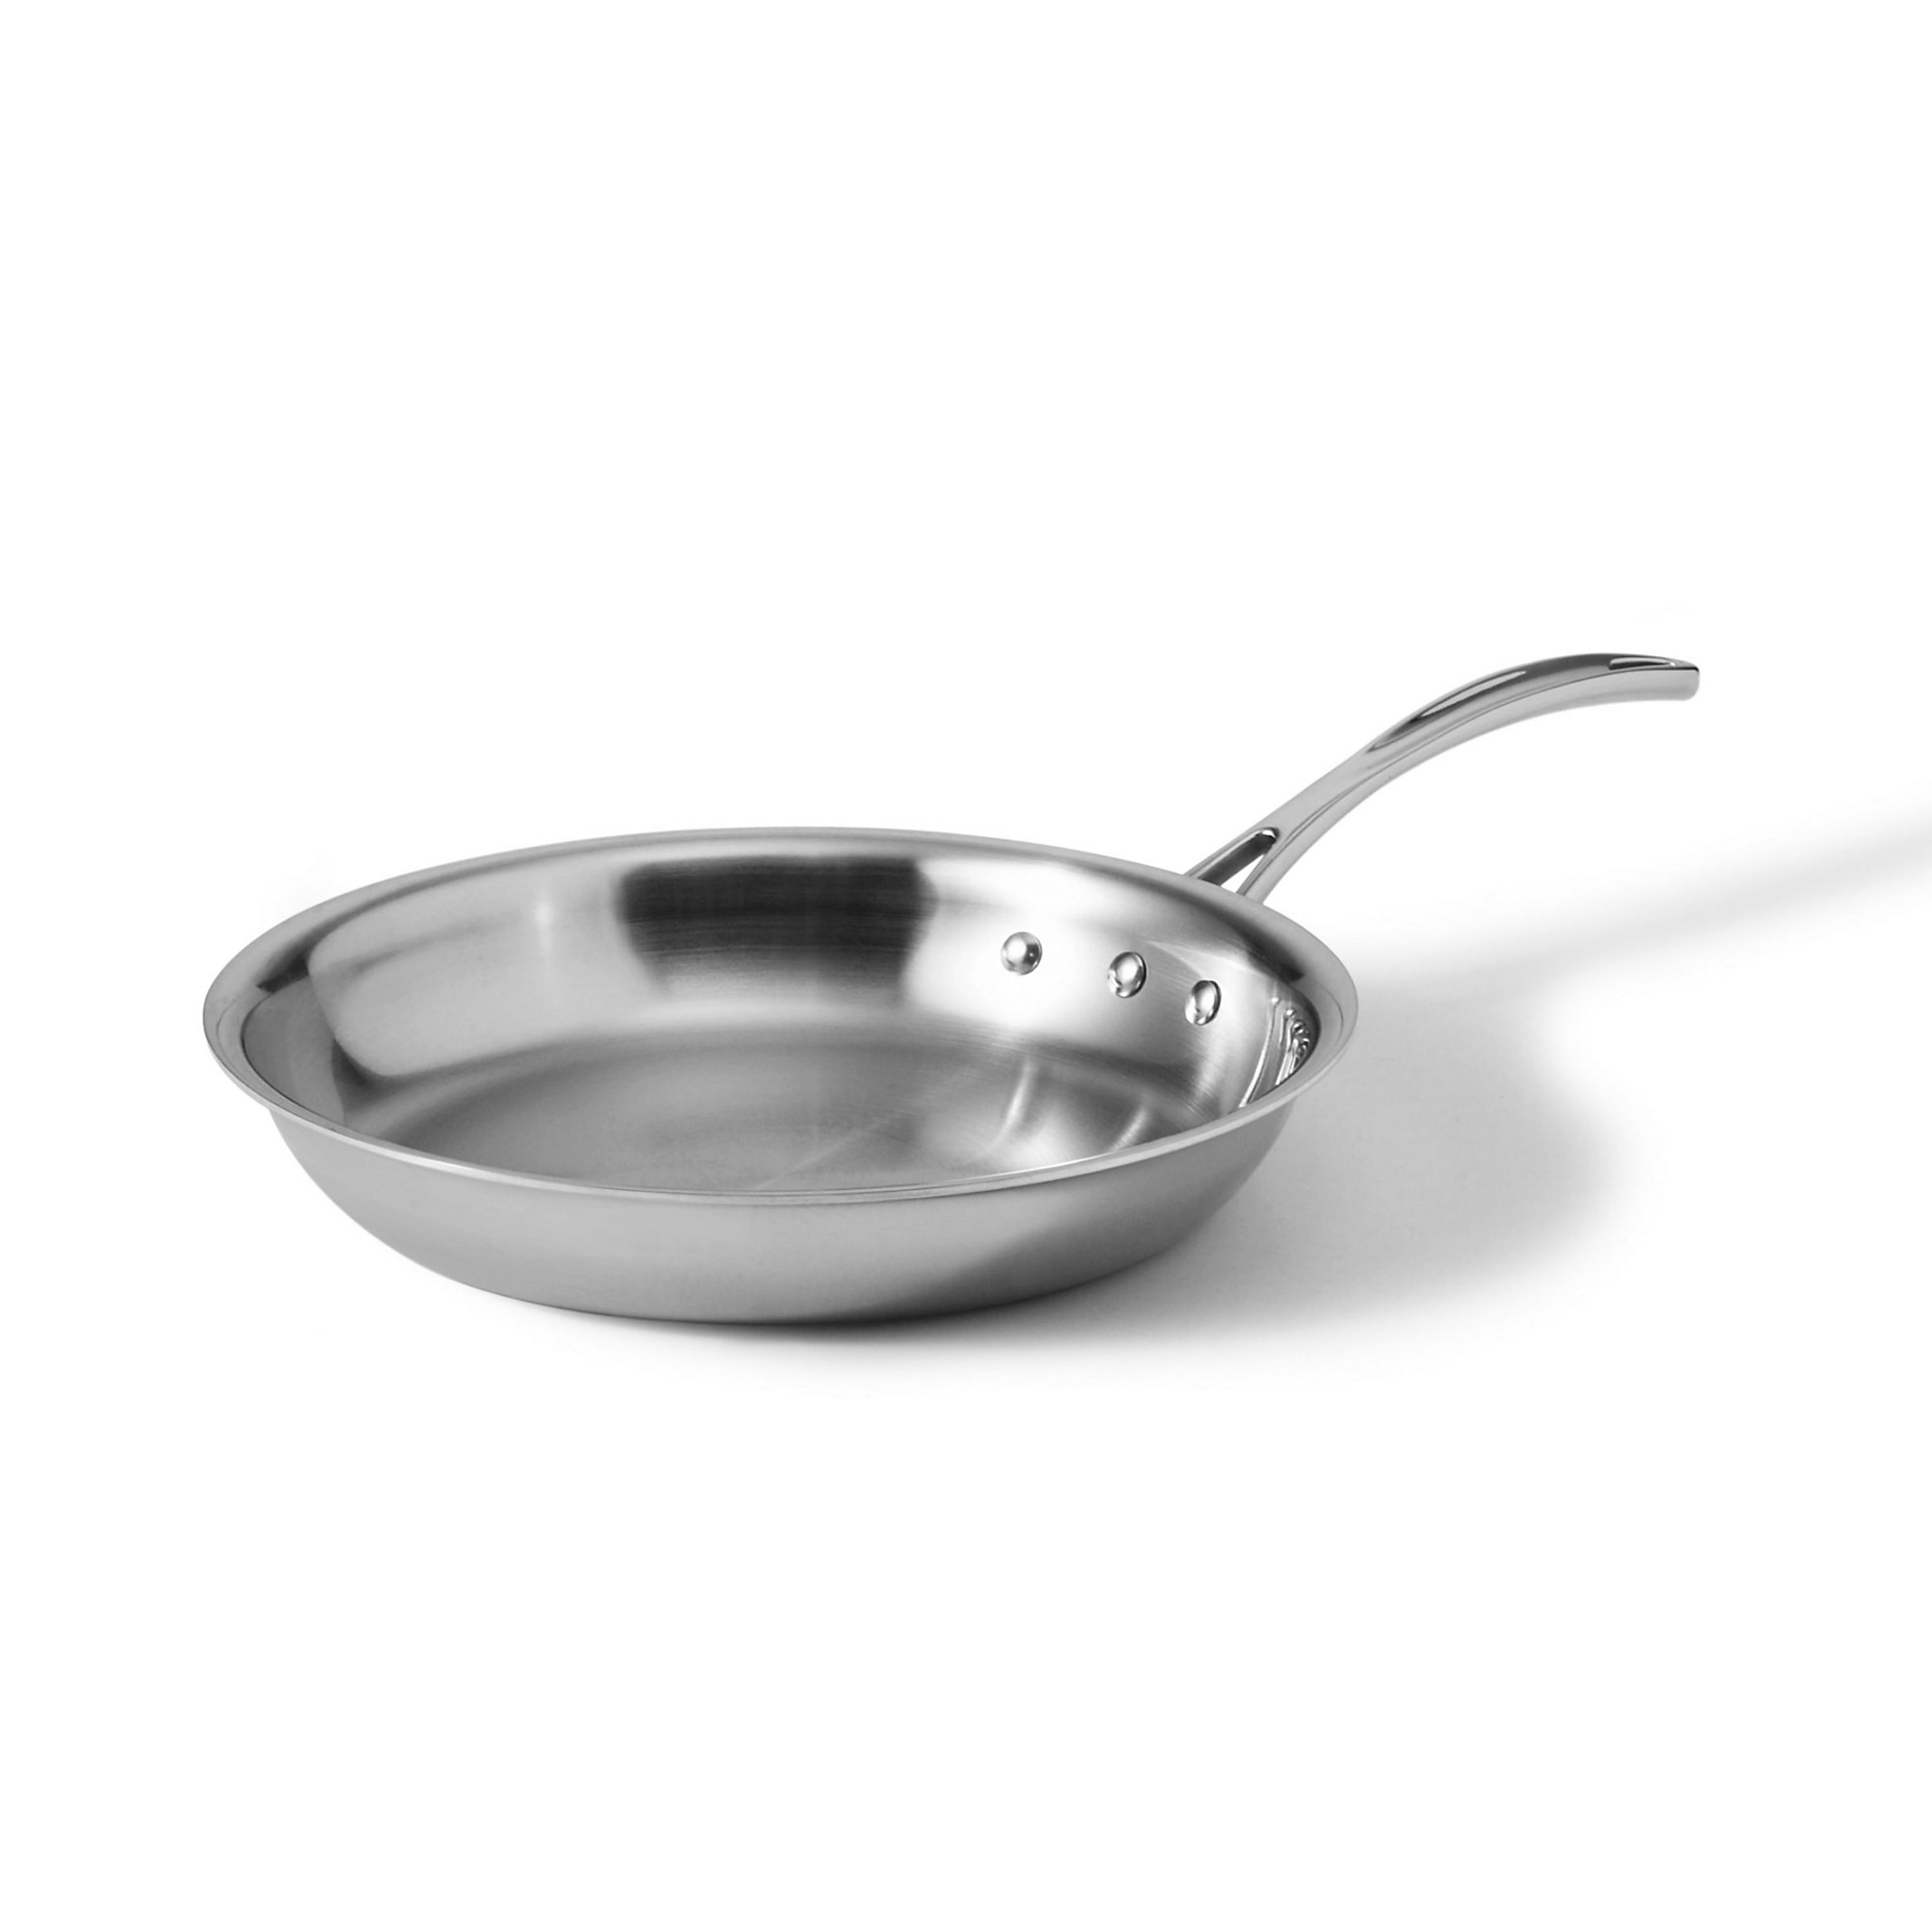 Calphalon Tri-Ply Stainless Steel 10-Inch Omelette Pan - Walmart.com Calphalon 10 Inch Pan Stainless Steel